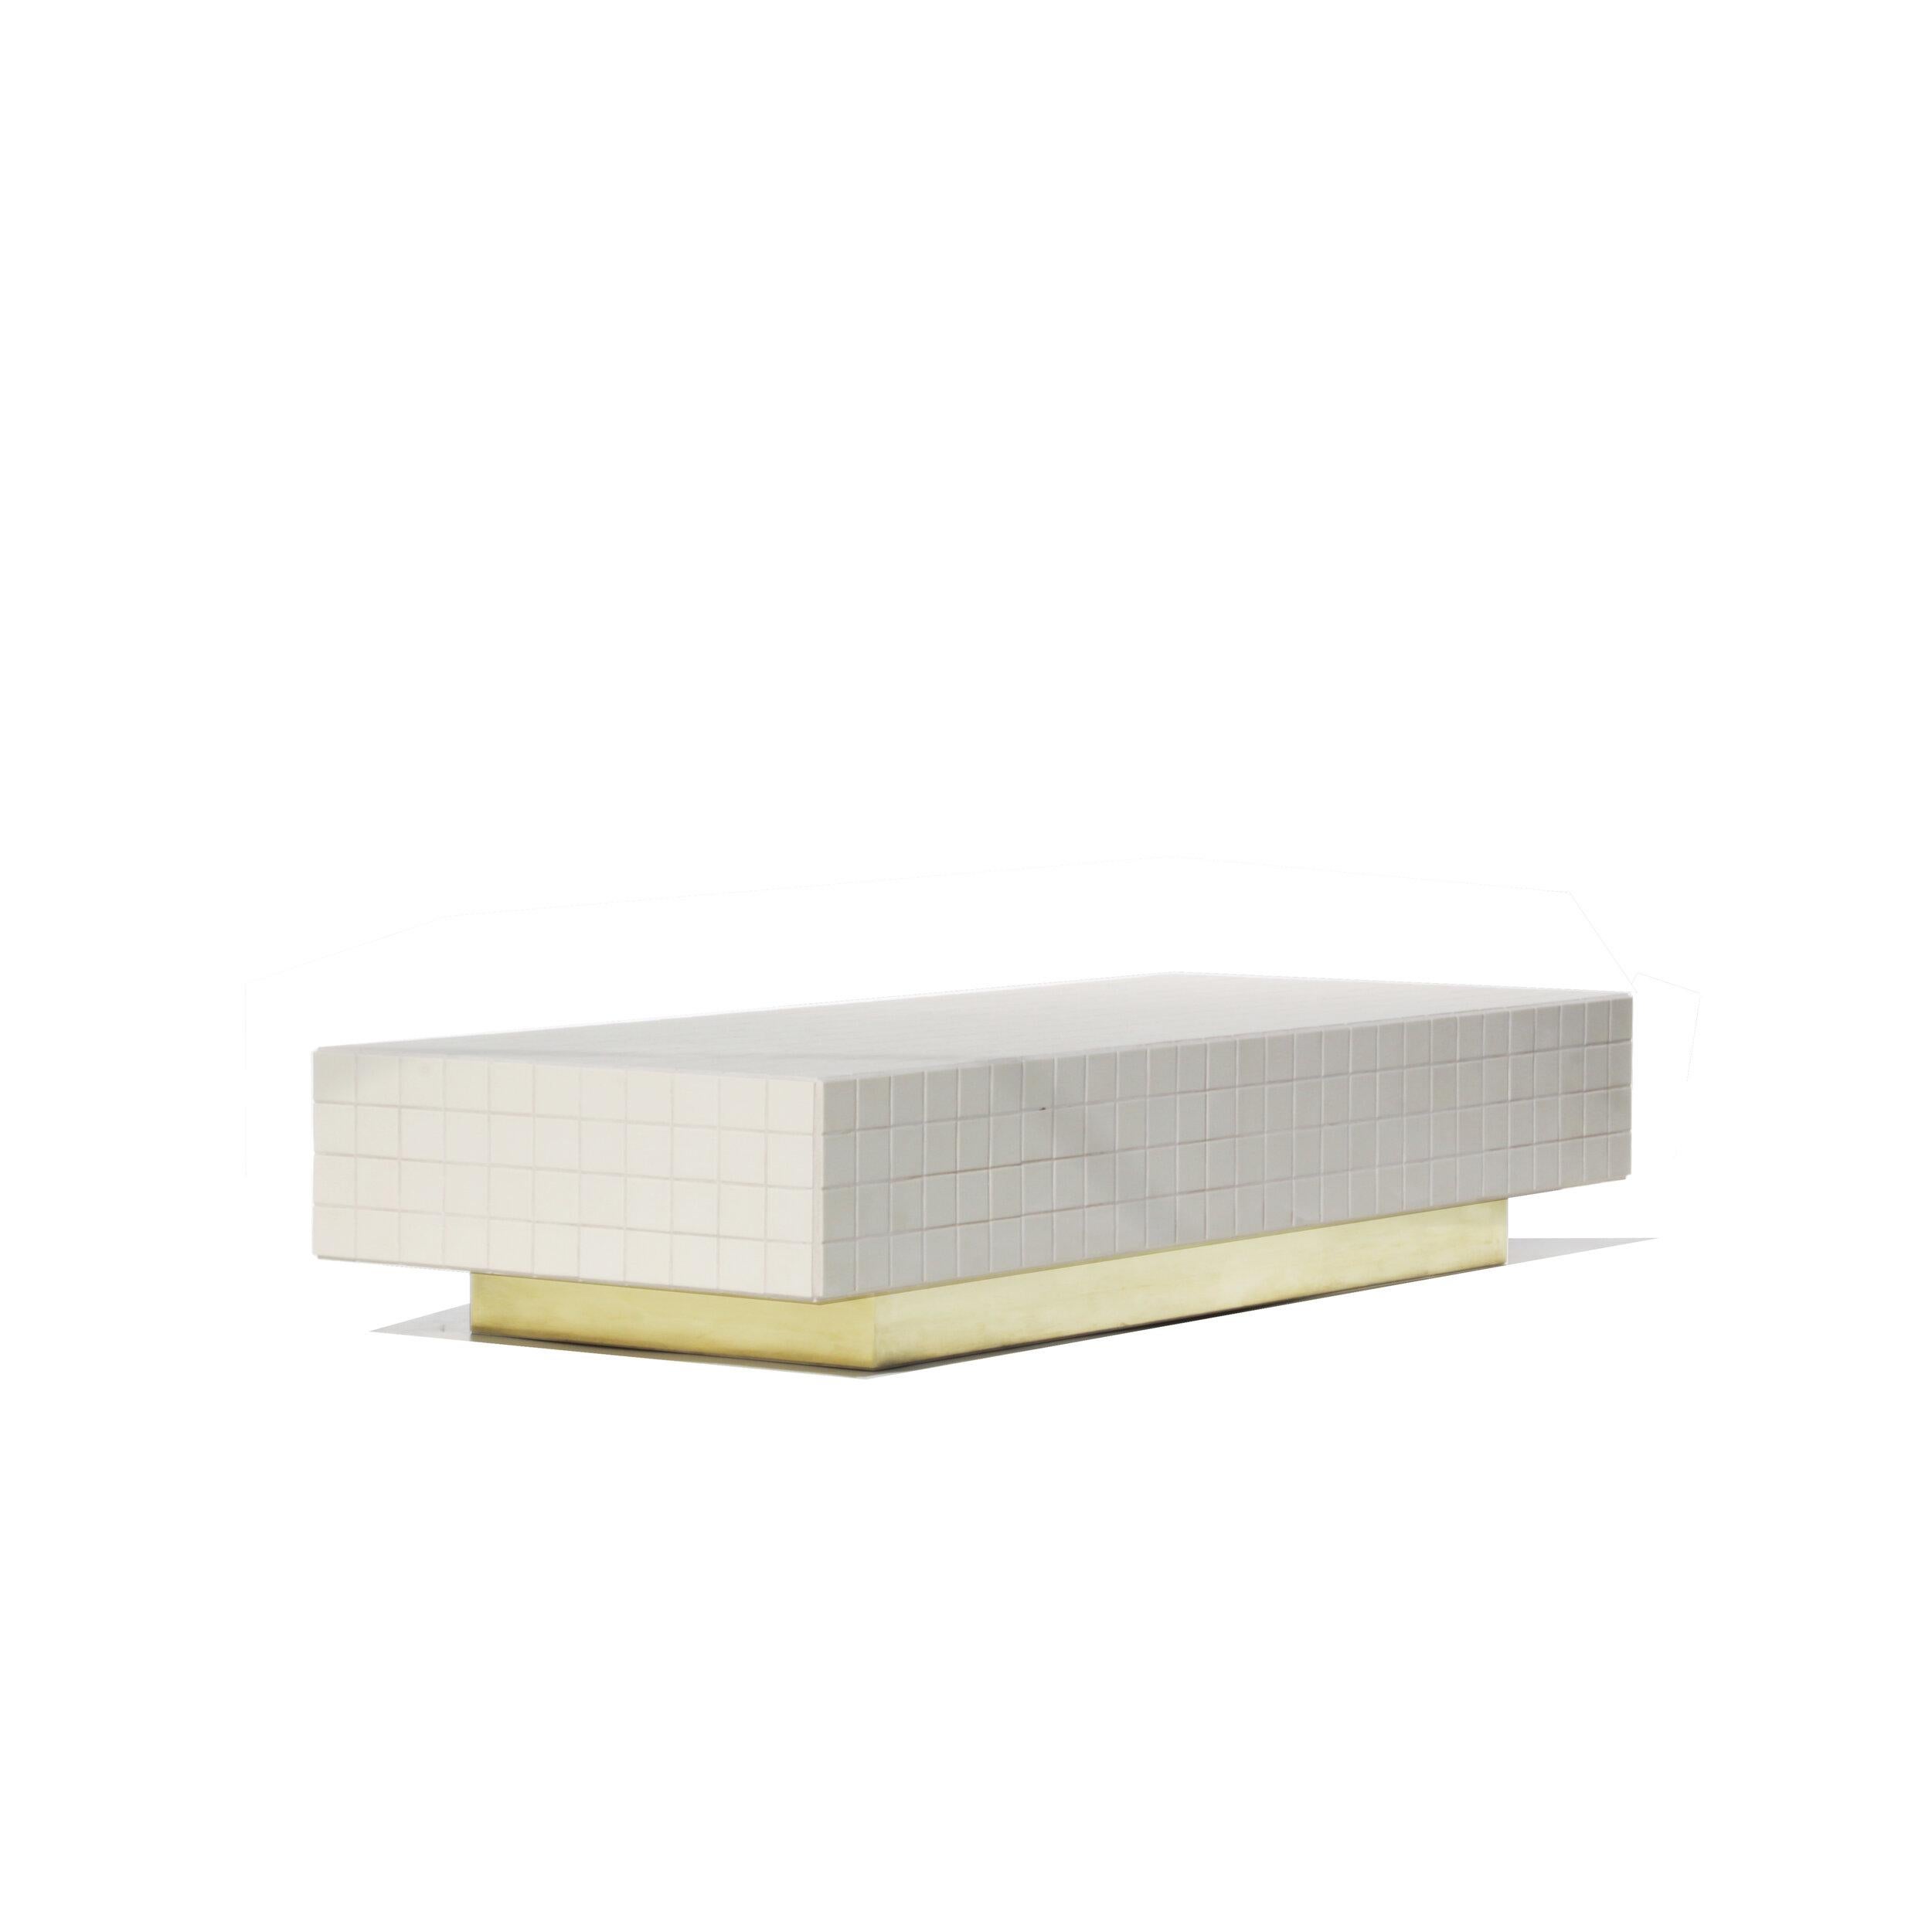 Designed and made by Nima Abili in Los Angeles this handcrafted low table is cladded with almond beige matte porcelain tiles and sanded beige grout. Inspired by Brutalist style of architecture this collection offers a variety of pieces designed